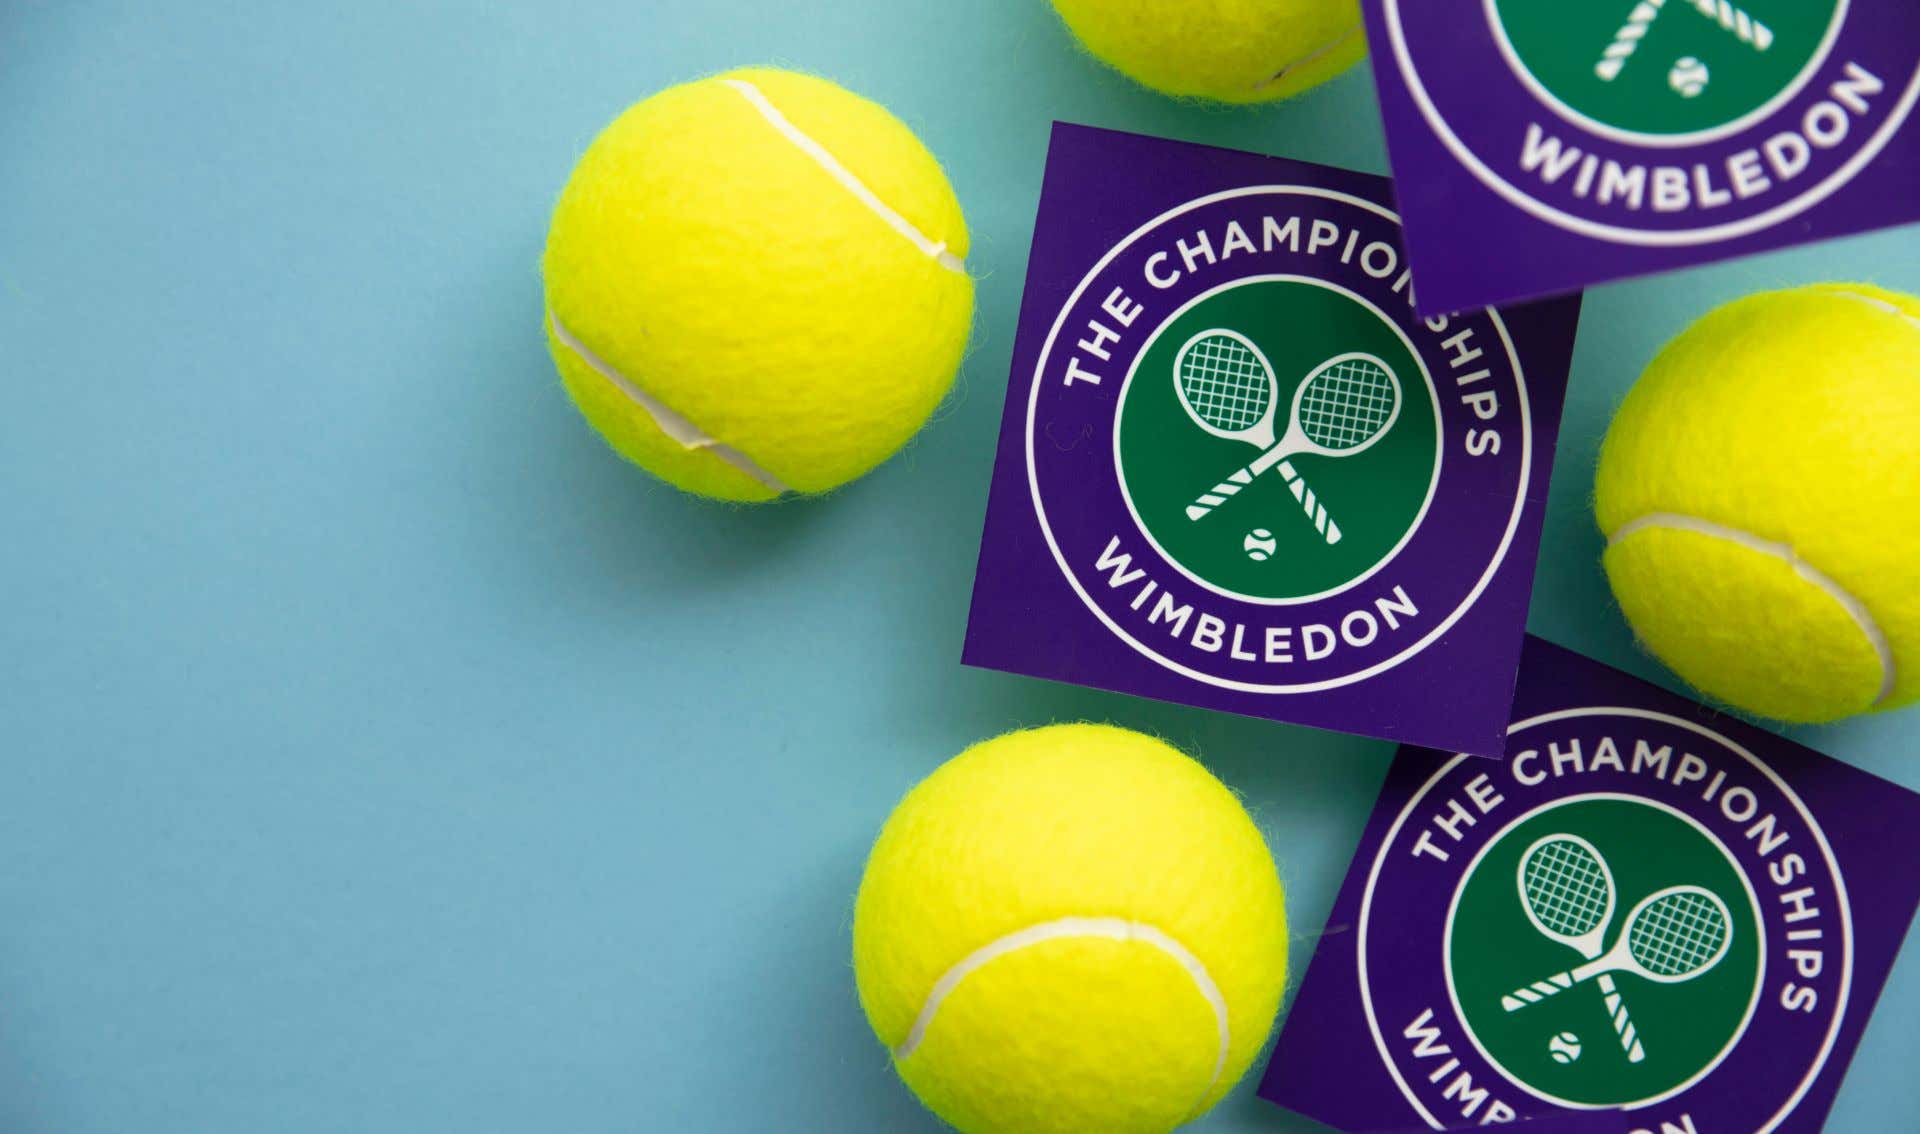 How to Watch Wimbledon 2023 Online without Cable